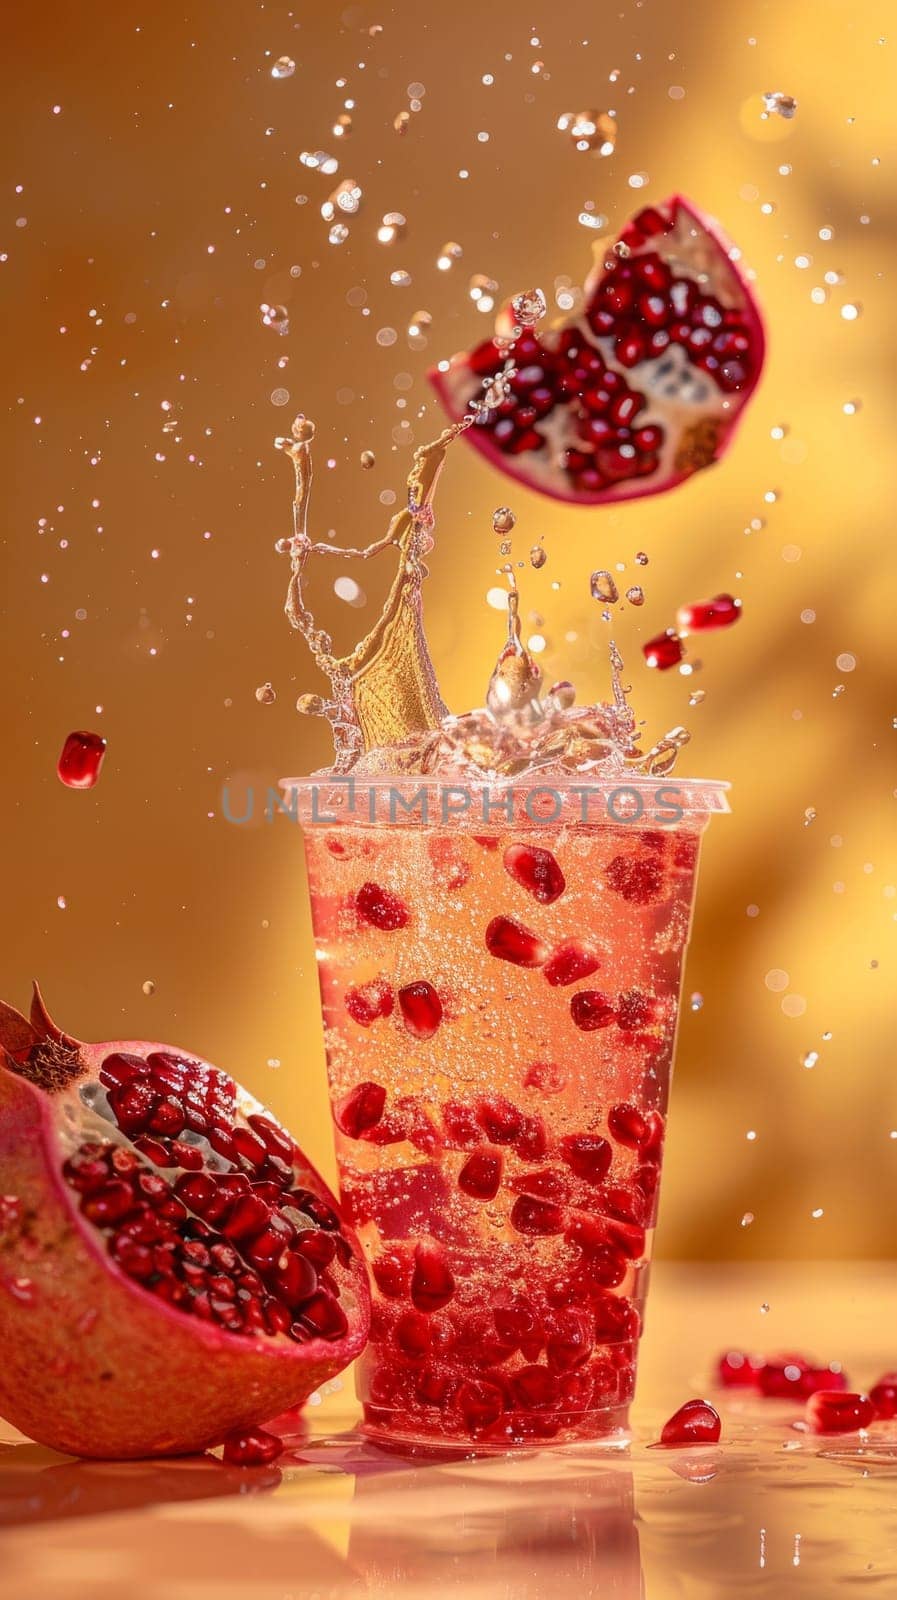 A glass of iced tea with a garnish of pomegranate slices. The drink is served in a tall glass with ice cubes and a garnish of pomegranate slices